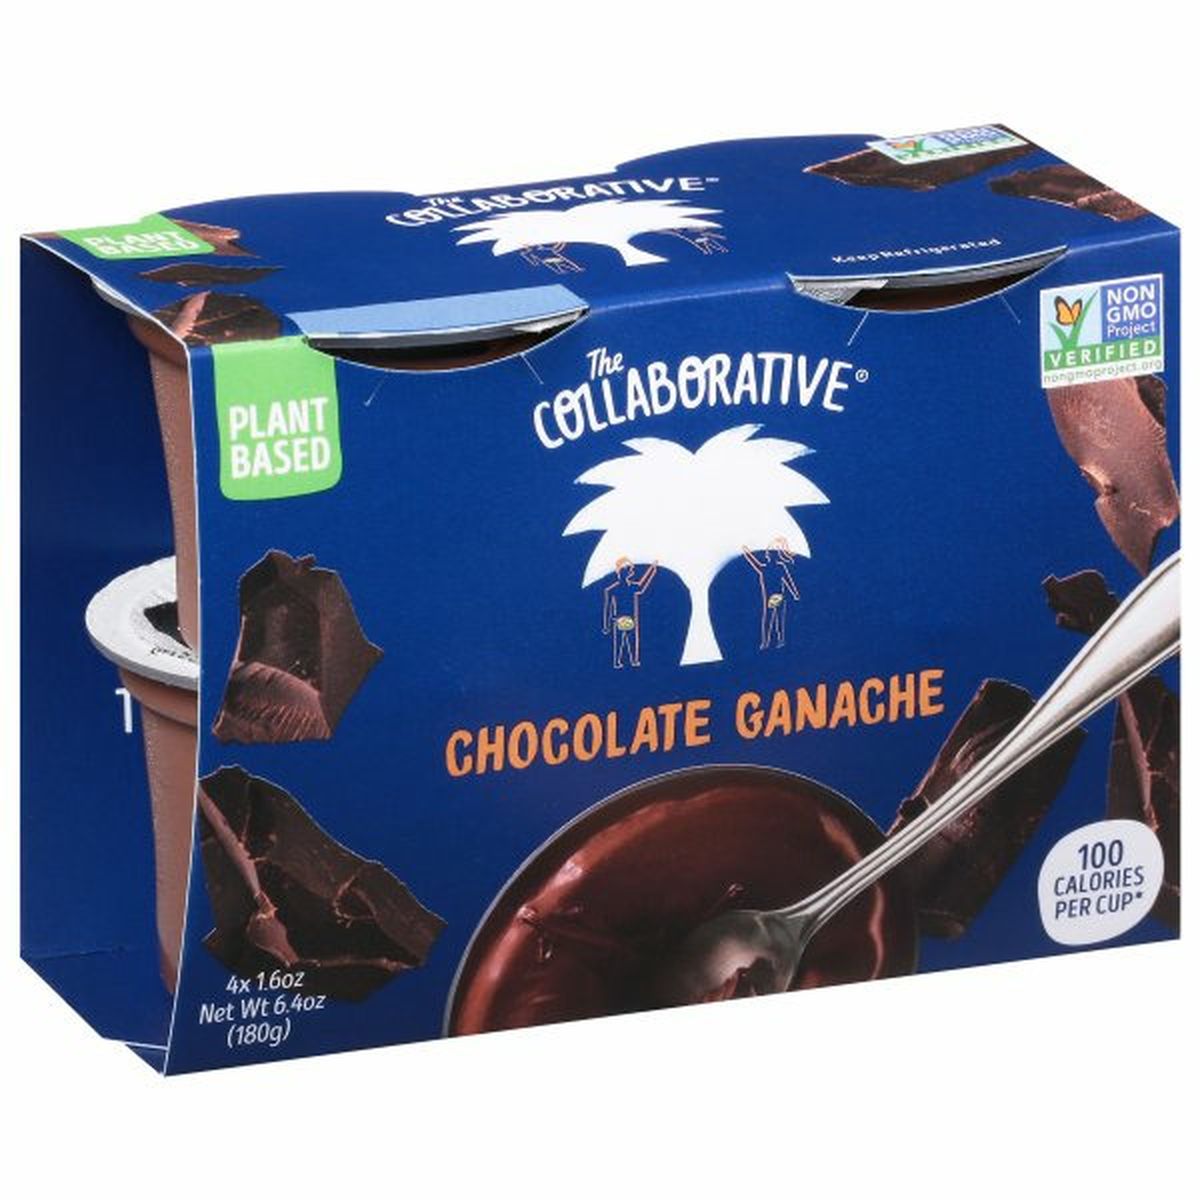 Calories in The Collaborative Ganache, Chocolate, 4 Pack